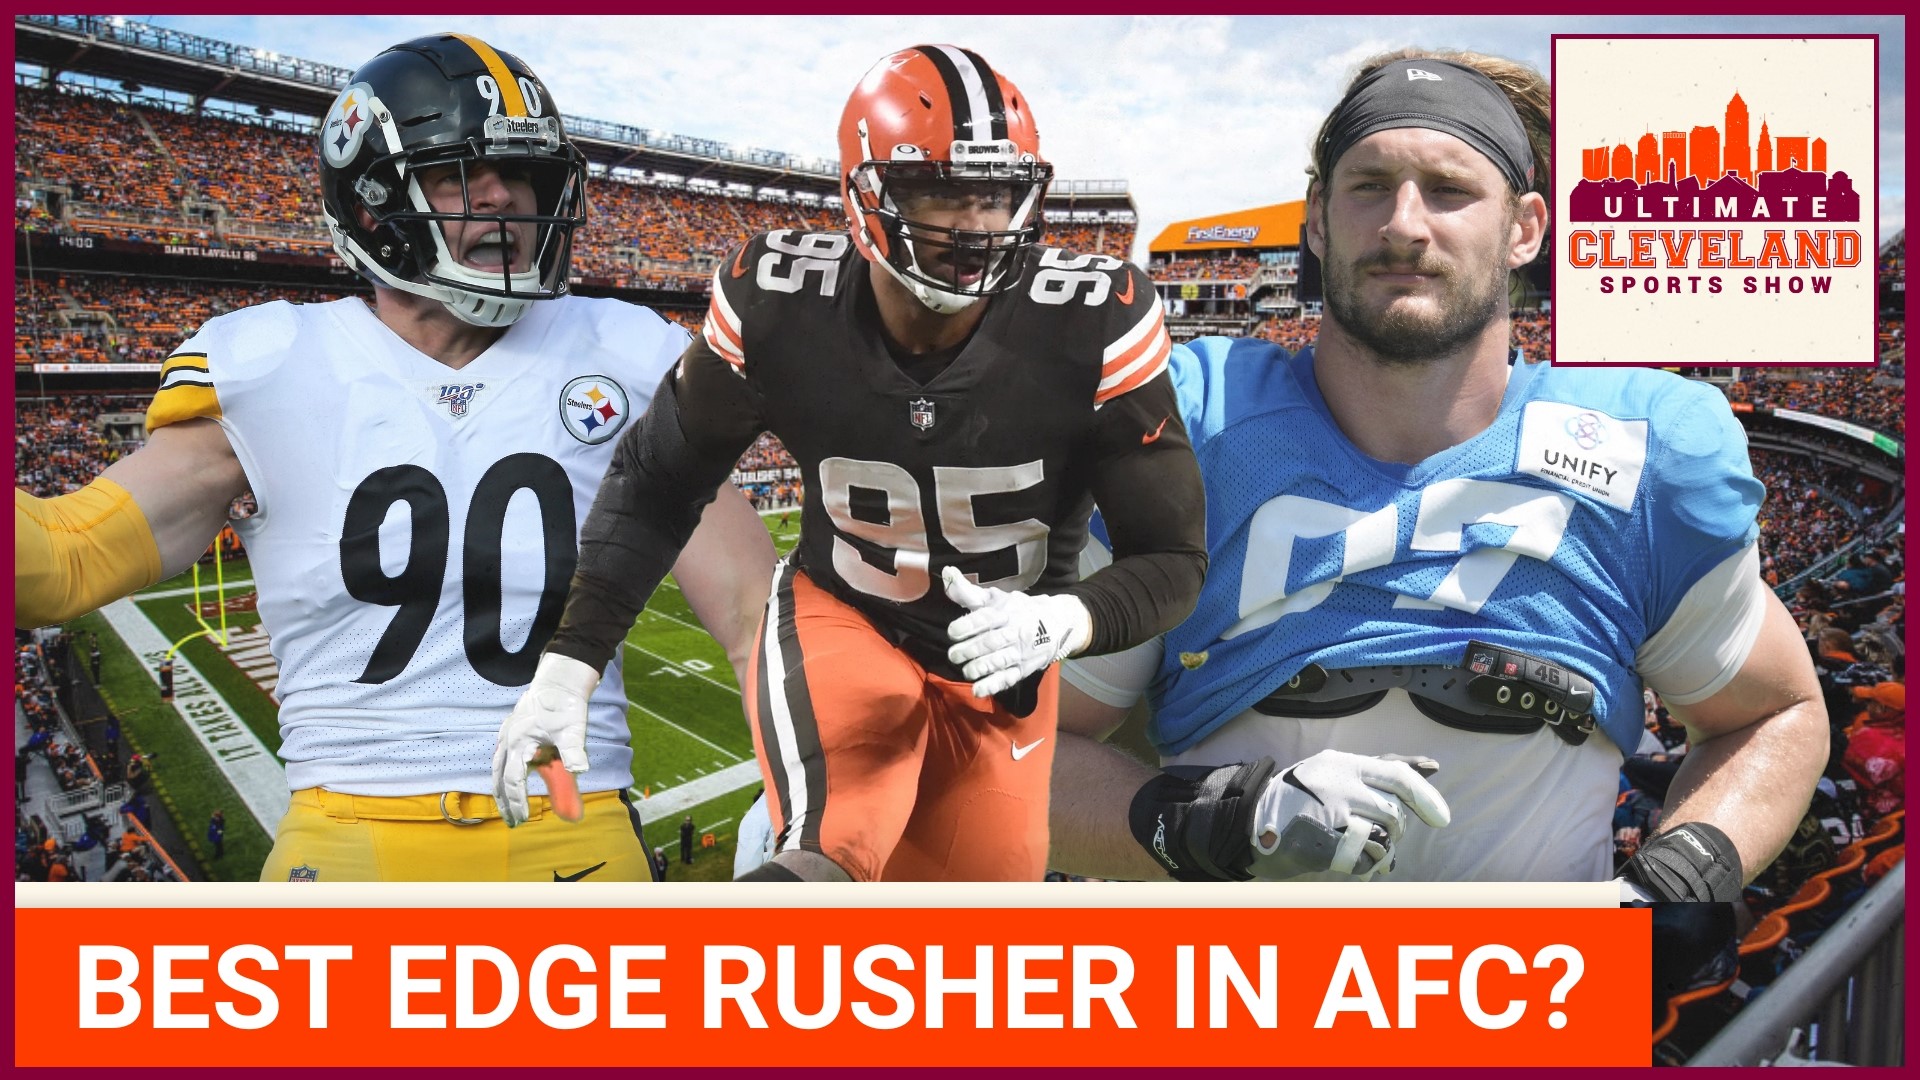 Is Myles Garrett definitively the BEST Edge Rusher in the AFC? | PFF ranks the best AFC defender at each position